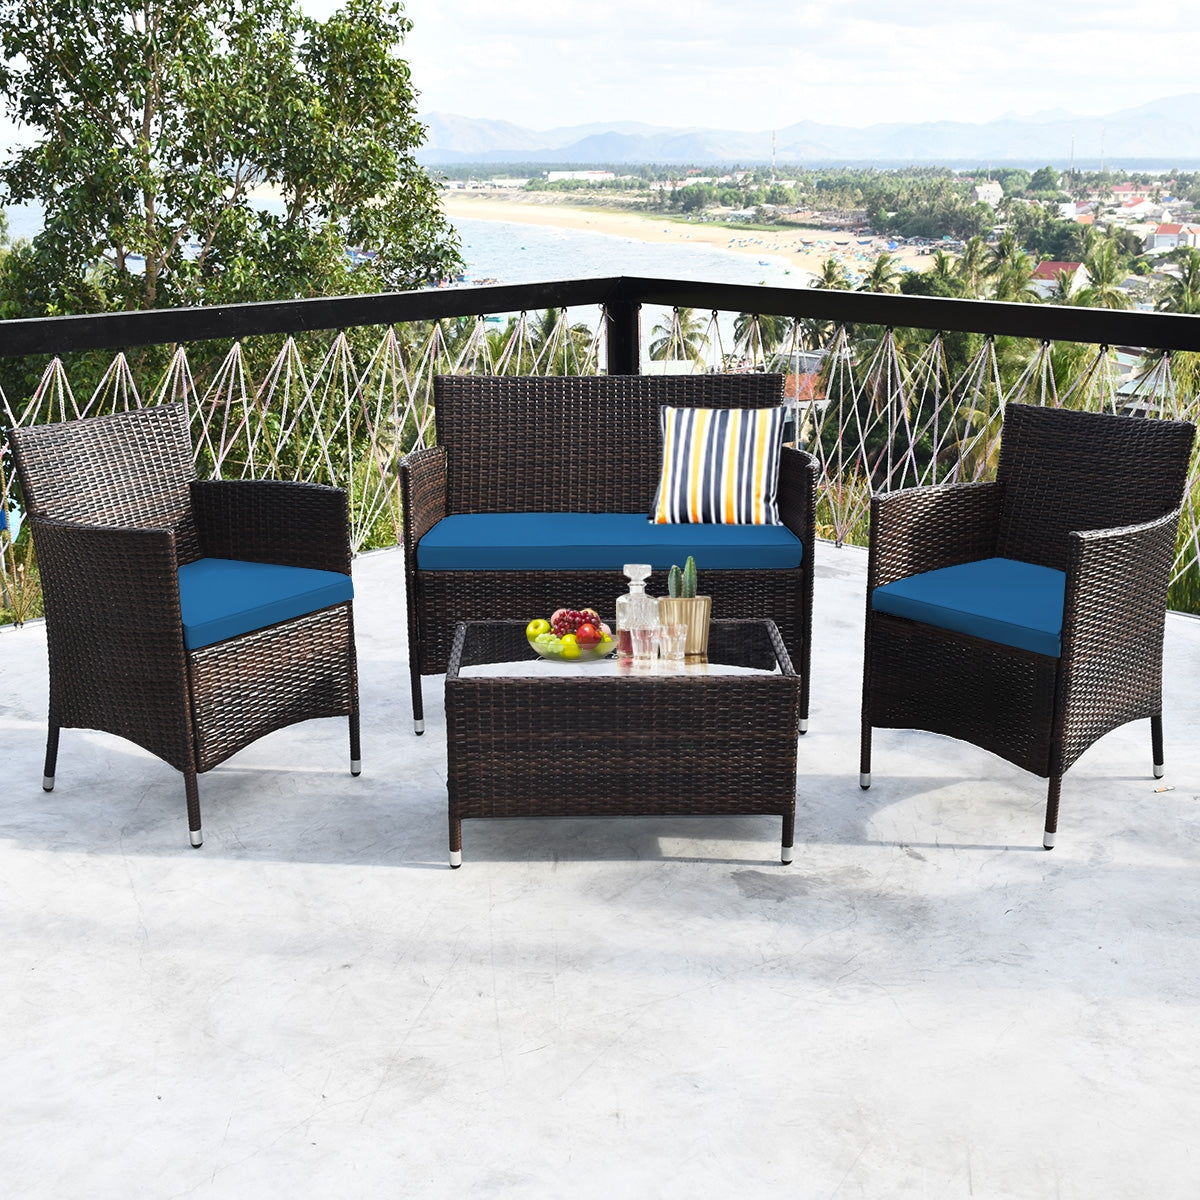 4 Pieces Comfortable Outdoor Rattan Sofa Set with Glass Coffee Table-Peacock Blue